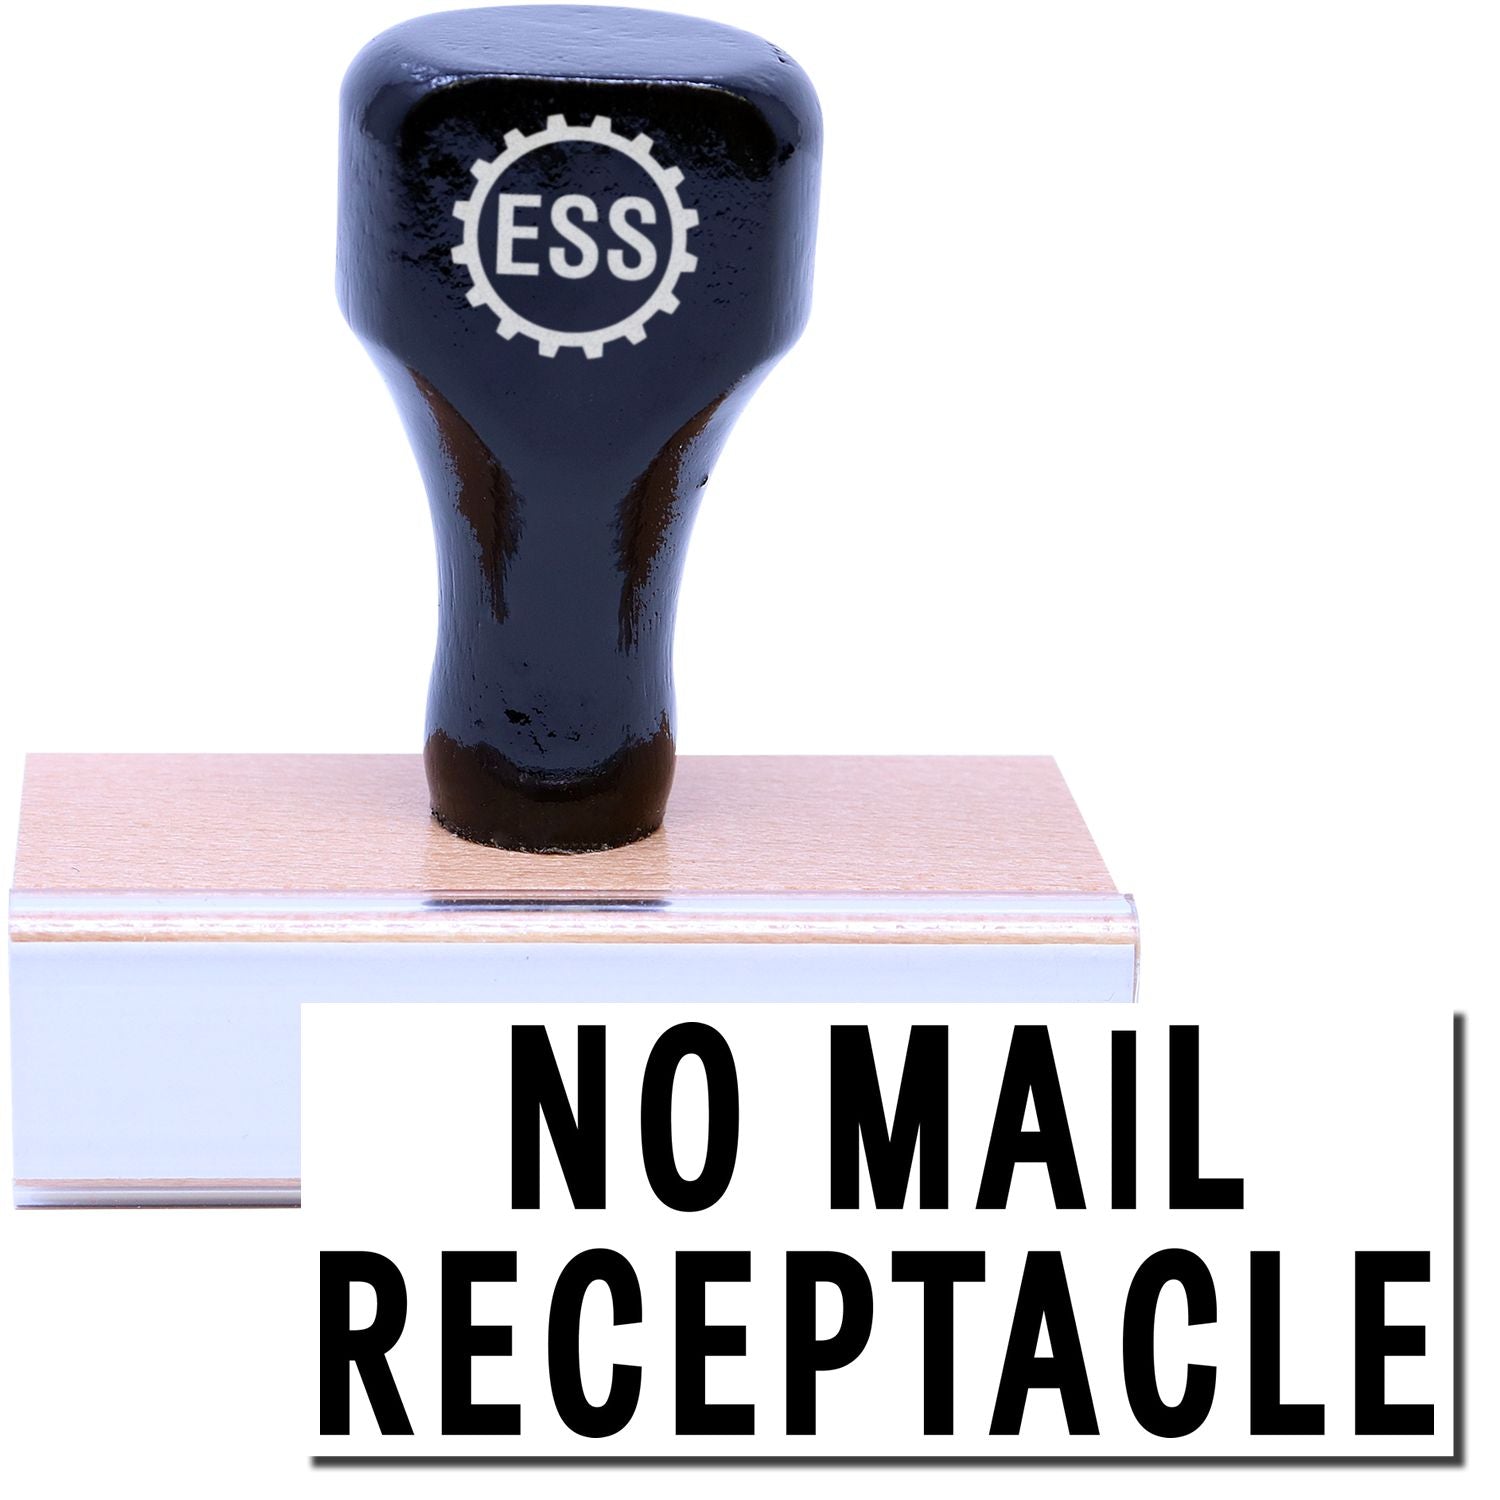 A stock office rubber stamp with a stamped image showing how the text "NO MAIL RECEPTACLE" in a large font is displayed after stamping.